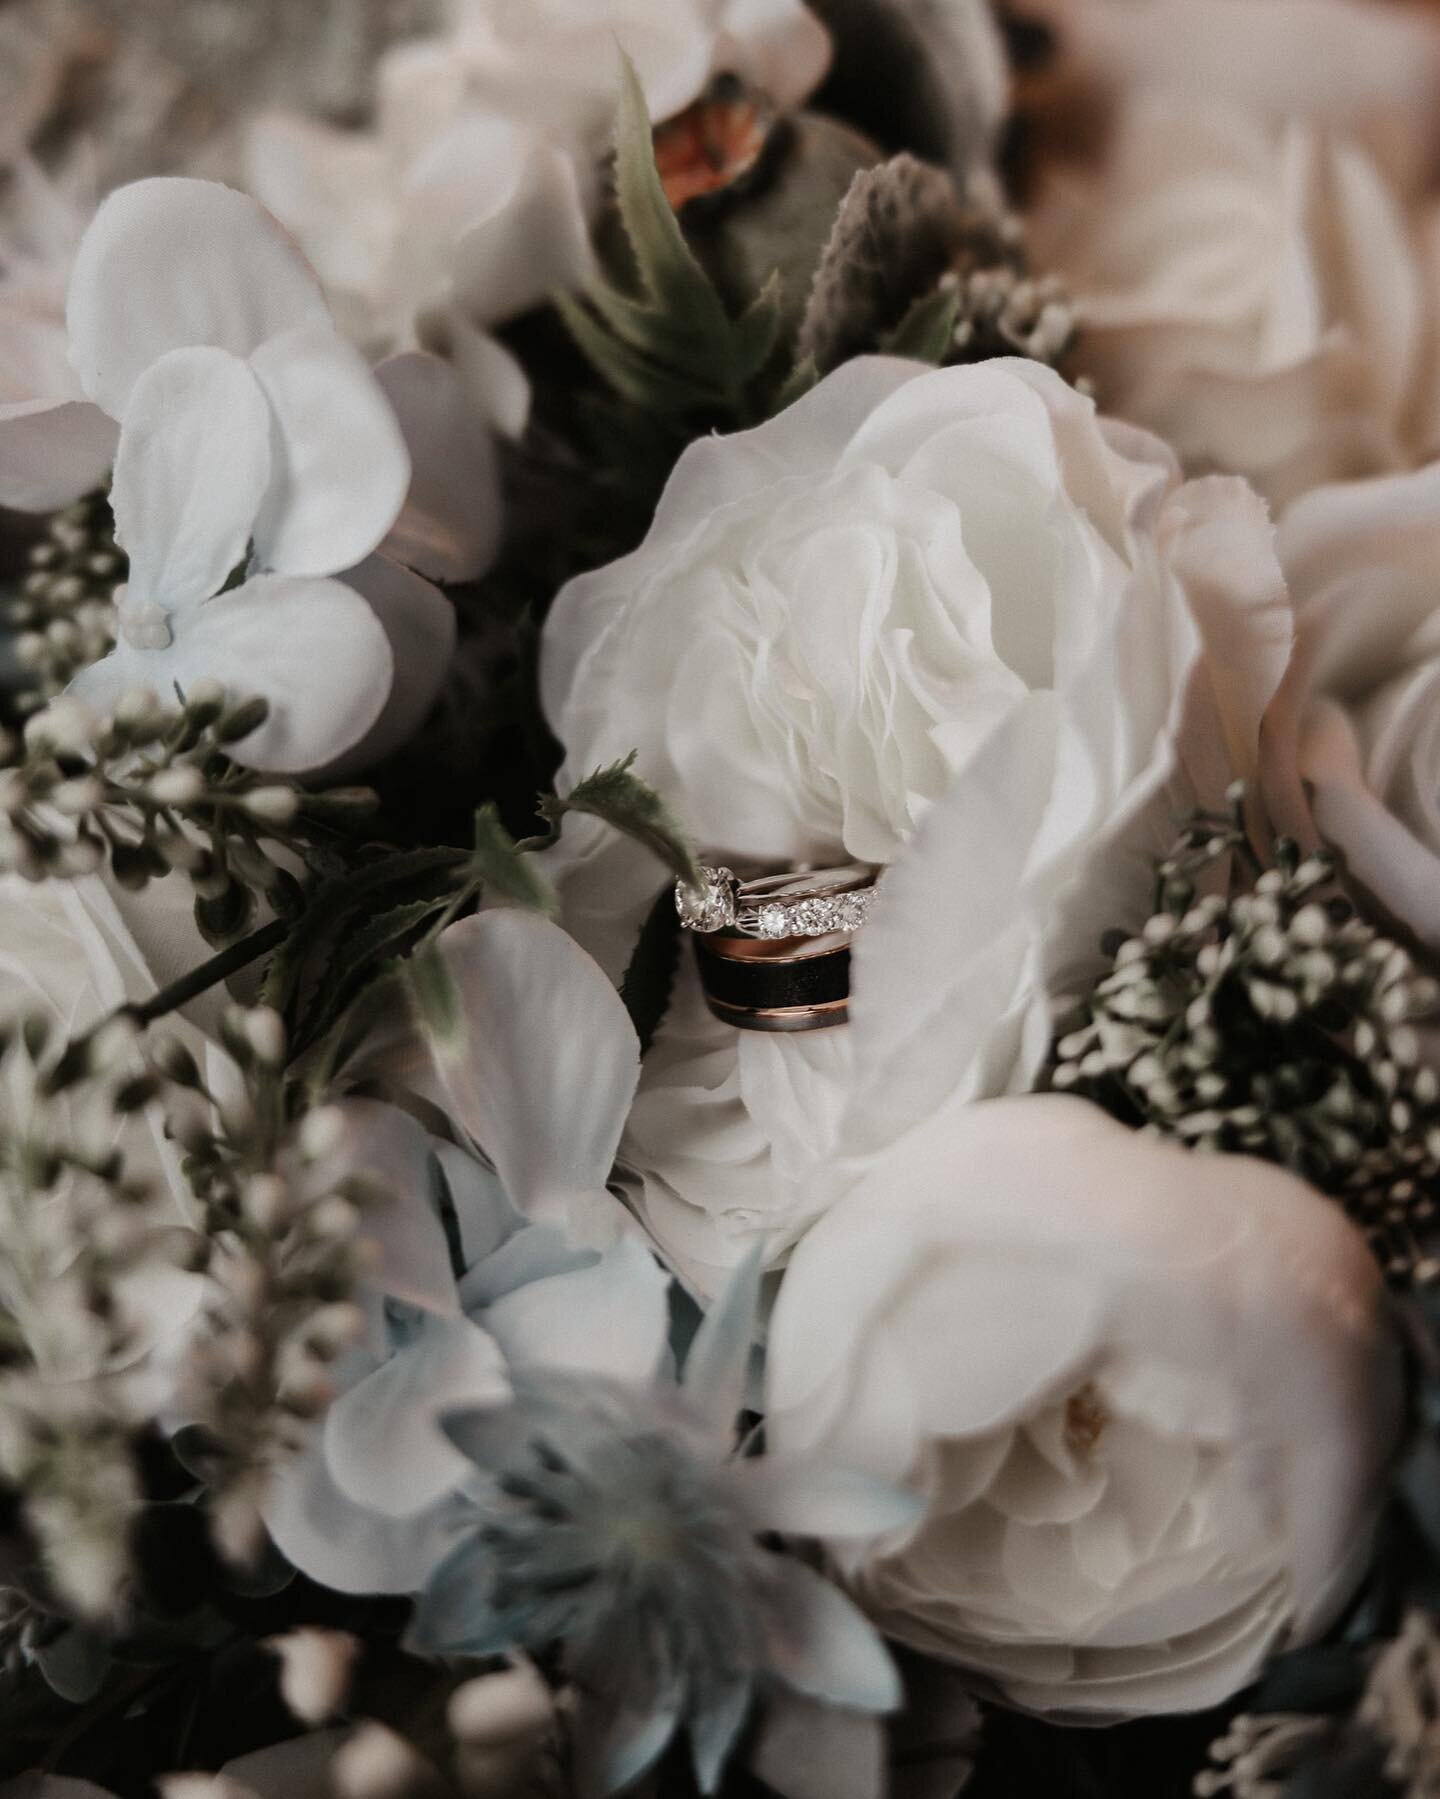 Getting the ring  and flat lays shots are one of my favorite parts of the wedding day 💍